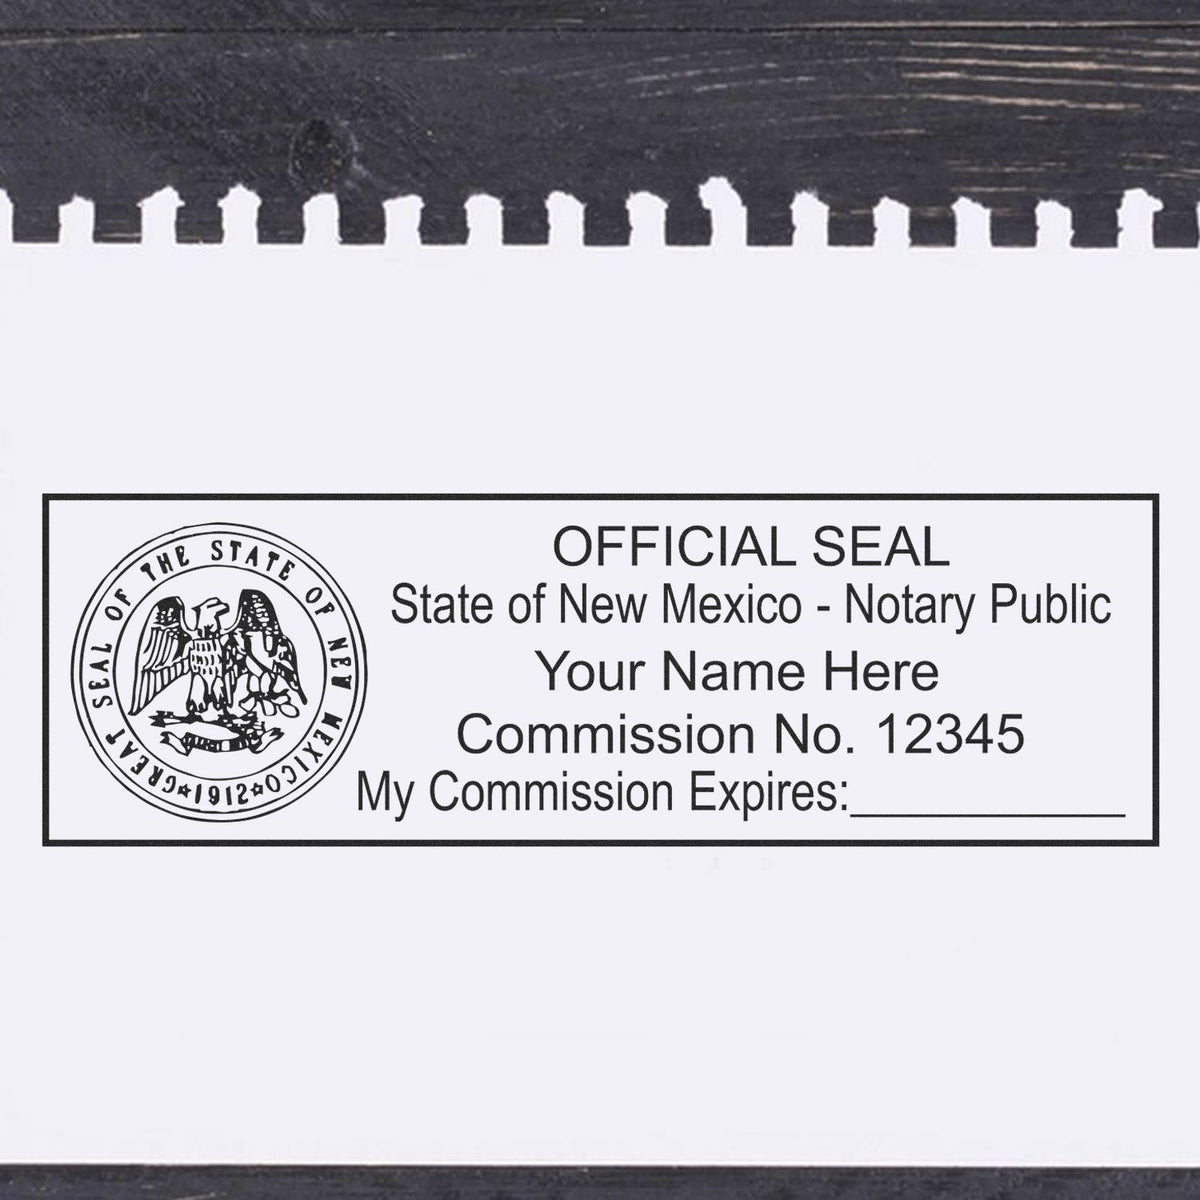 A photograph of the MaxLight Premium Pre-Inked New Mexico State Seal Notarial Stamp stamp impression reveals a vivid, professional image of the on paper.